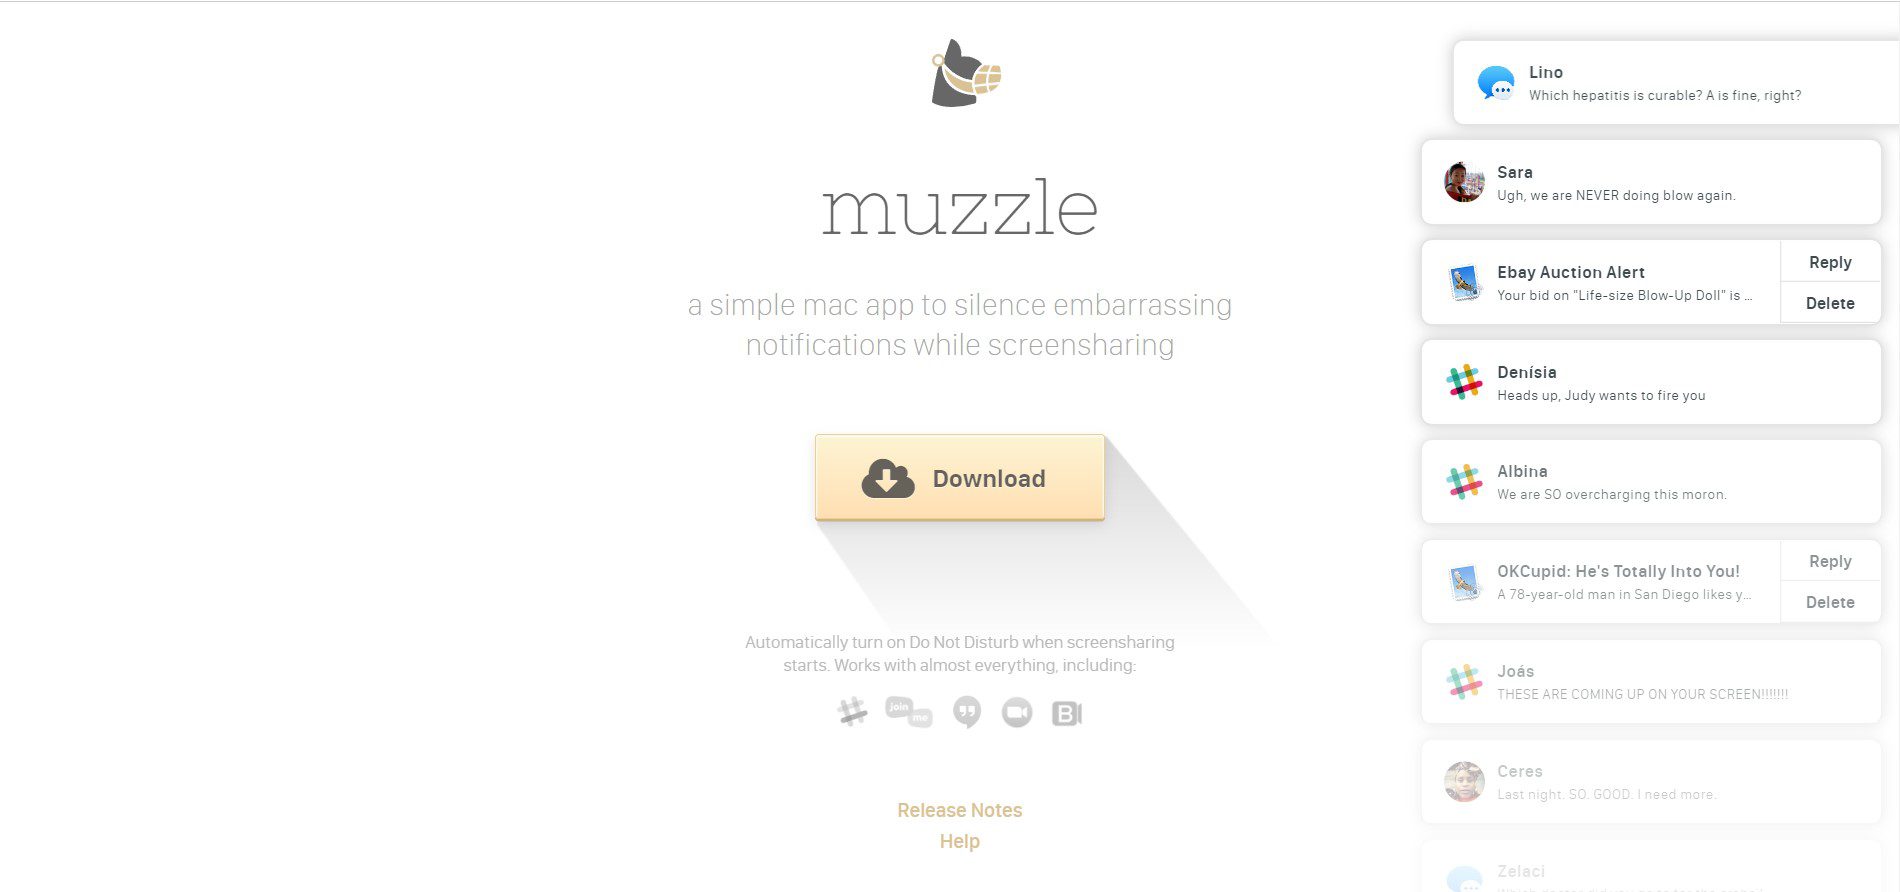 muzzle - a close friend for busy people